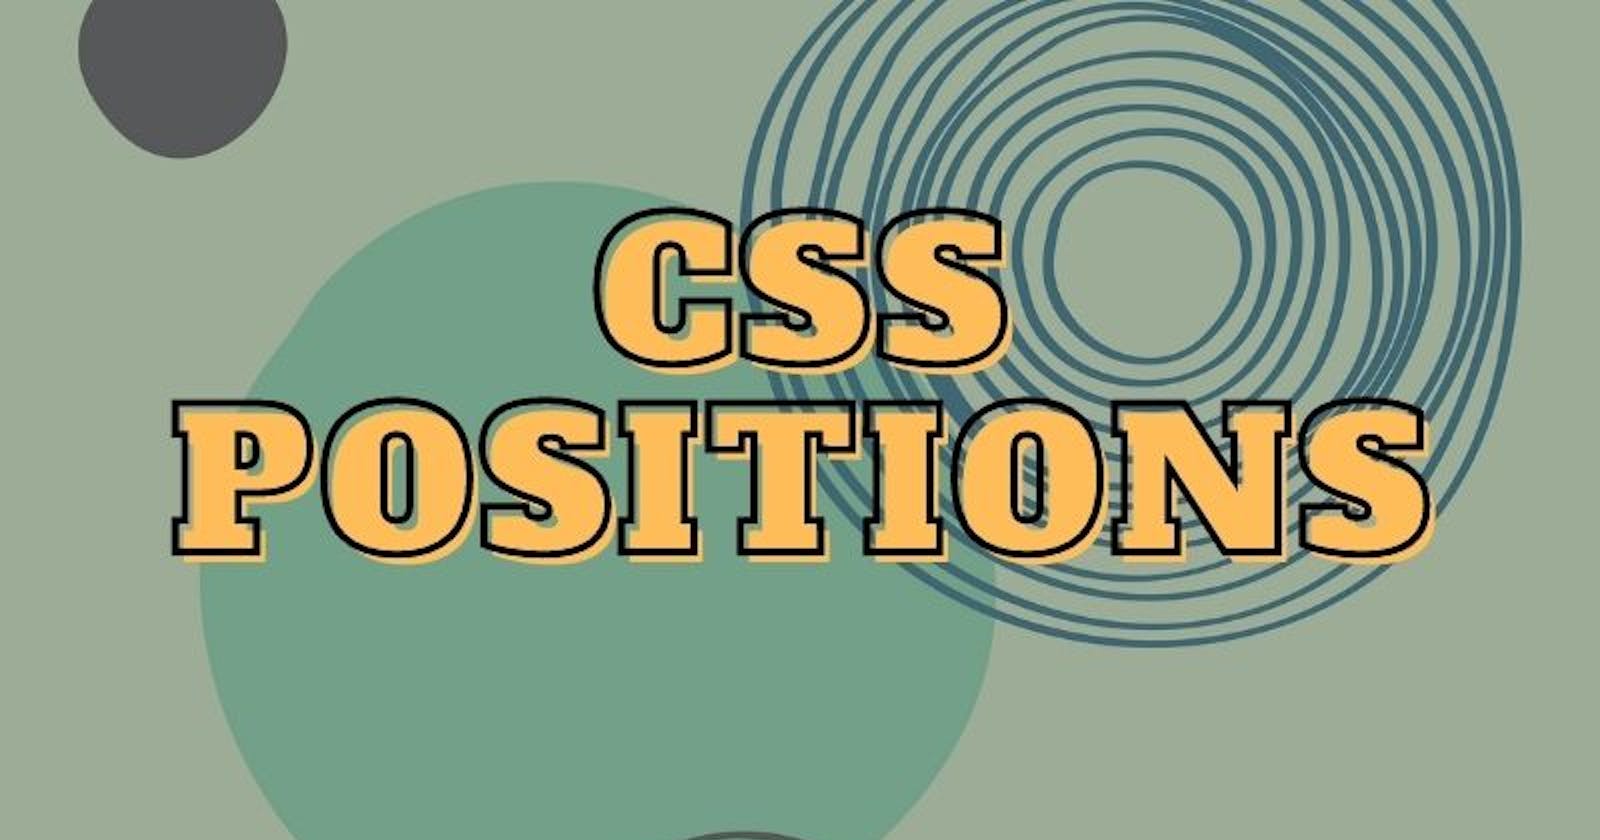 Set the correct position with the Position property of CSS